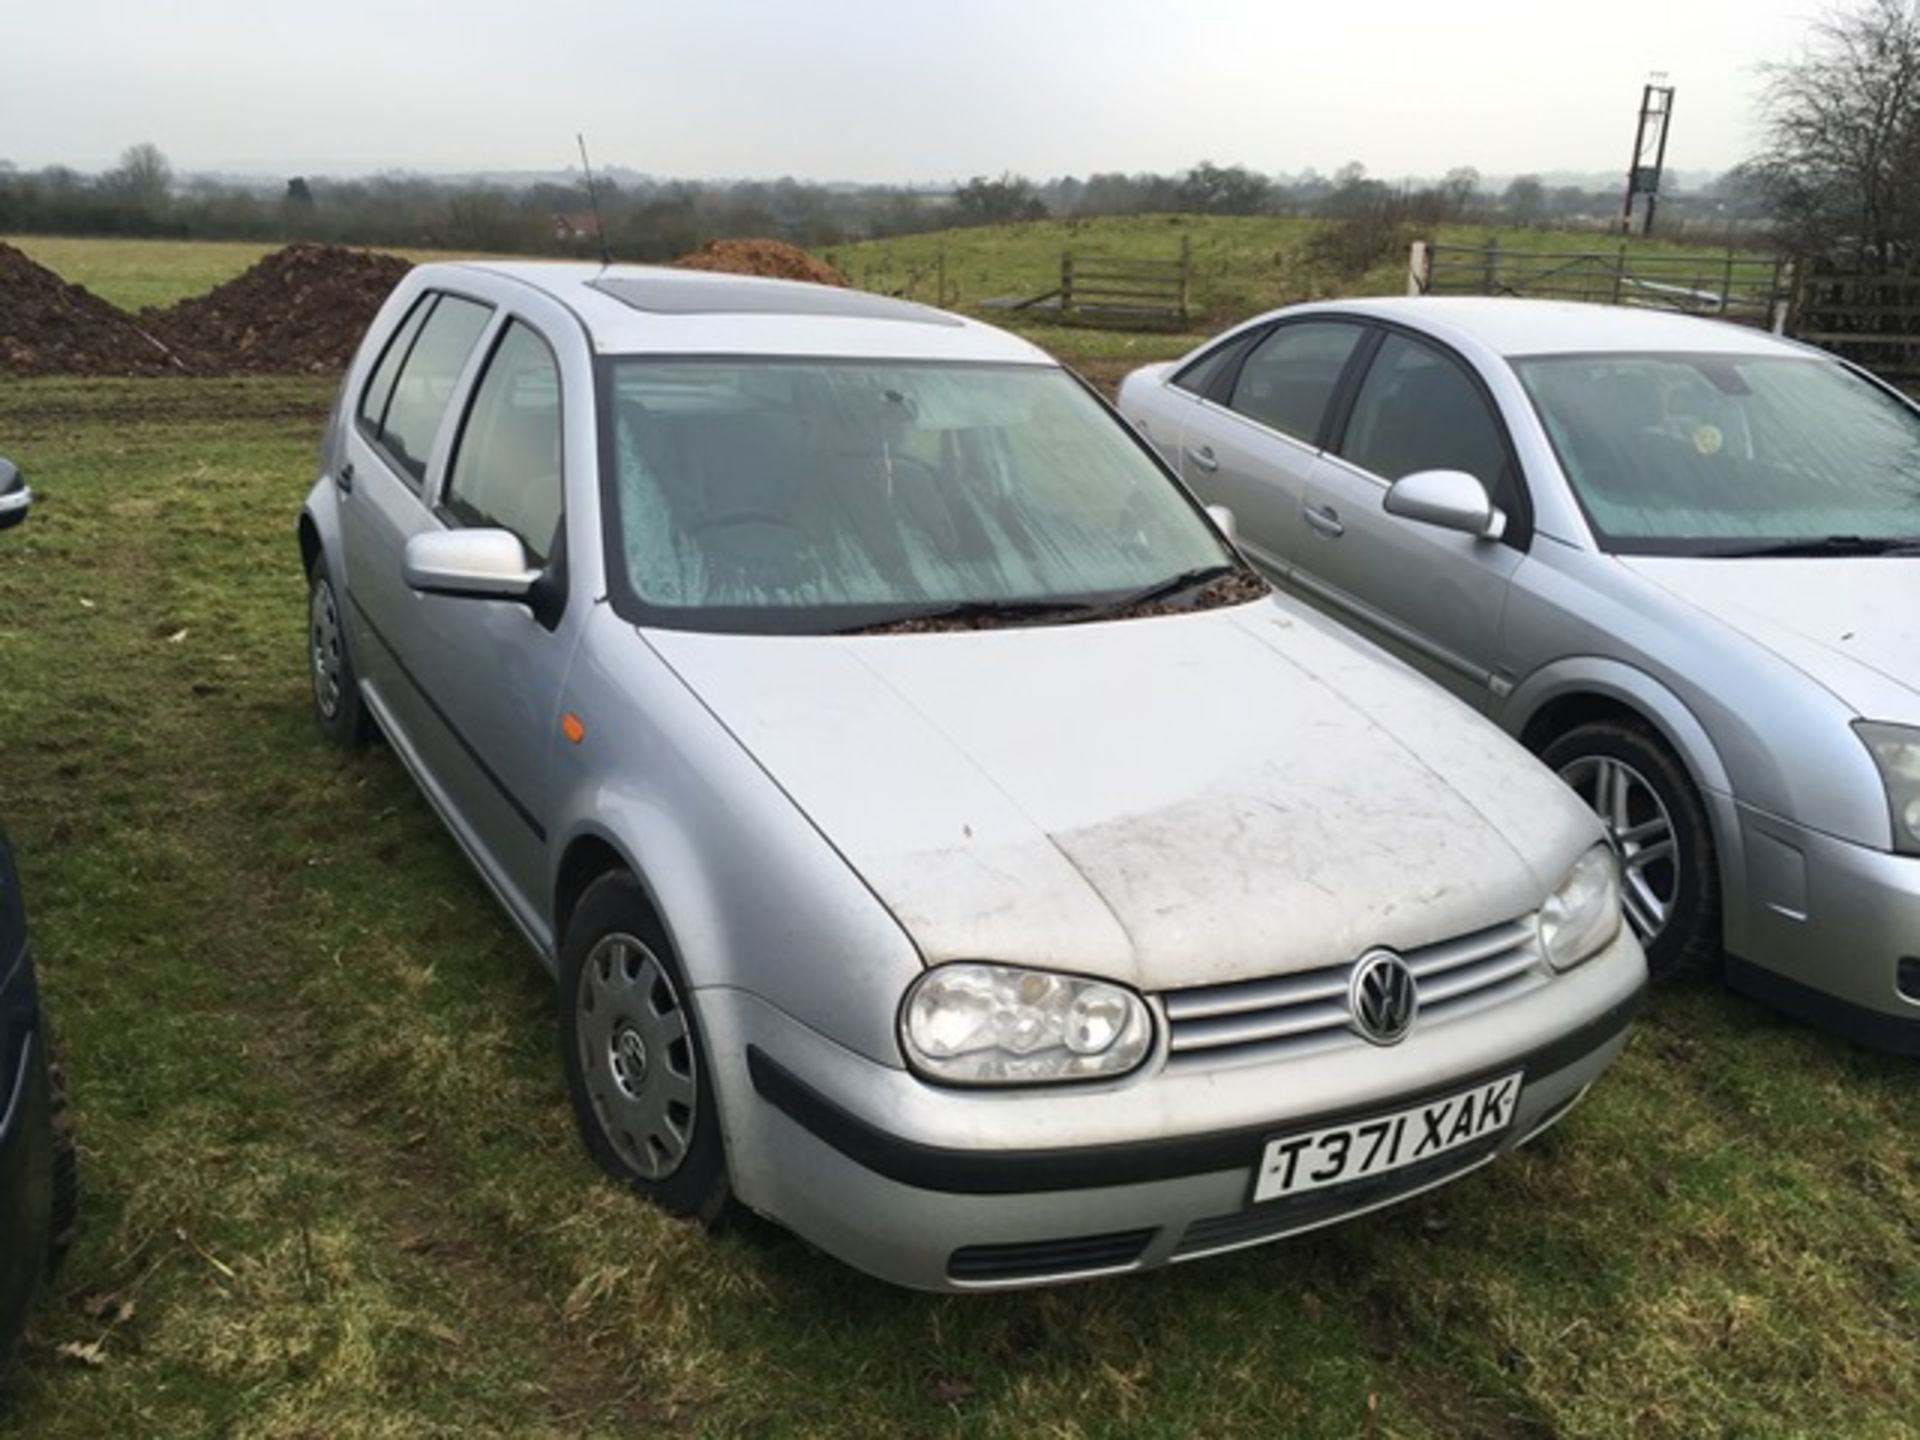 VW Golf 1.6 5 dr hatchback Registration Number T371 XAK THIS VEHICLE IS BEING SOLD AS SPARES OR - Image 2 of 4